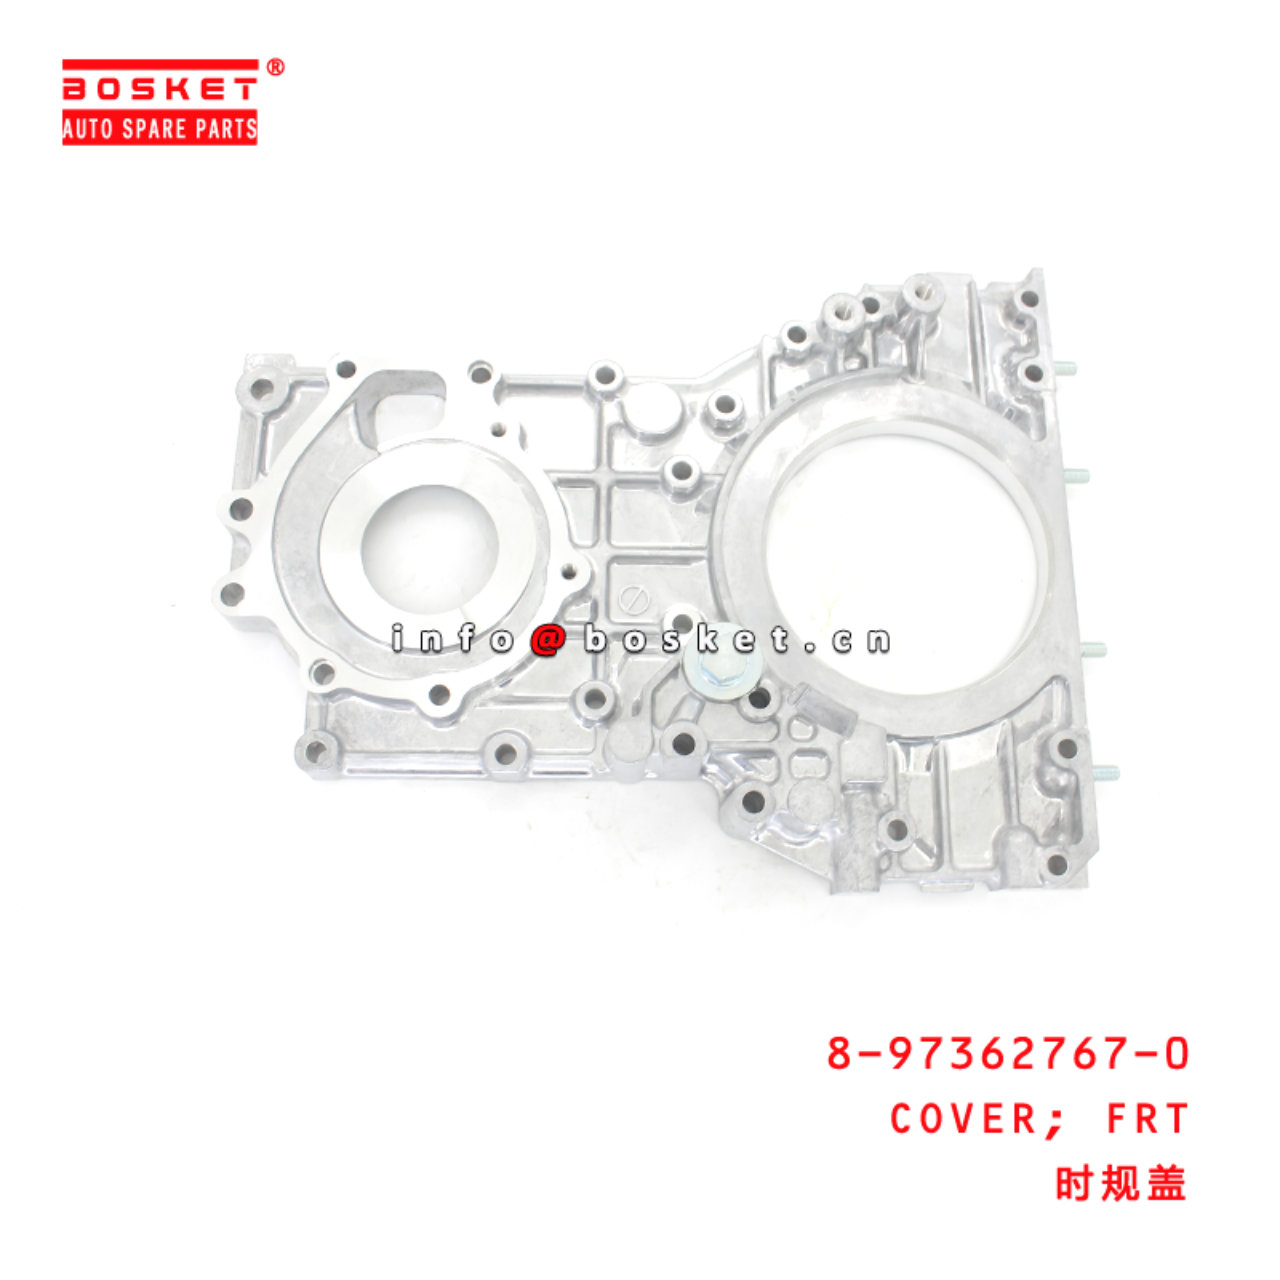 8-97362767-0 Front Cover suitable for ISUZU 700 4HK1 8973627670